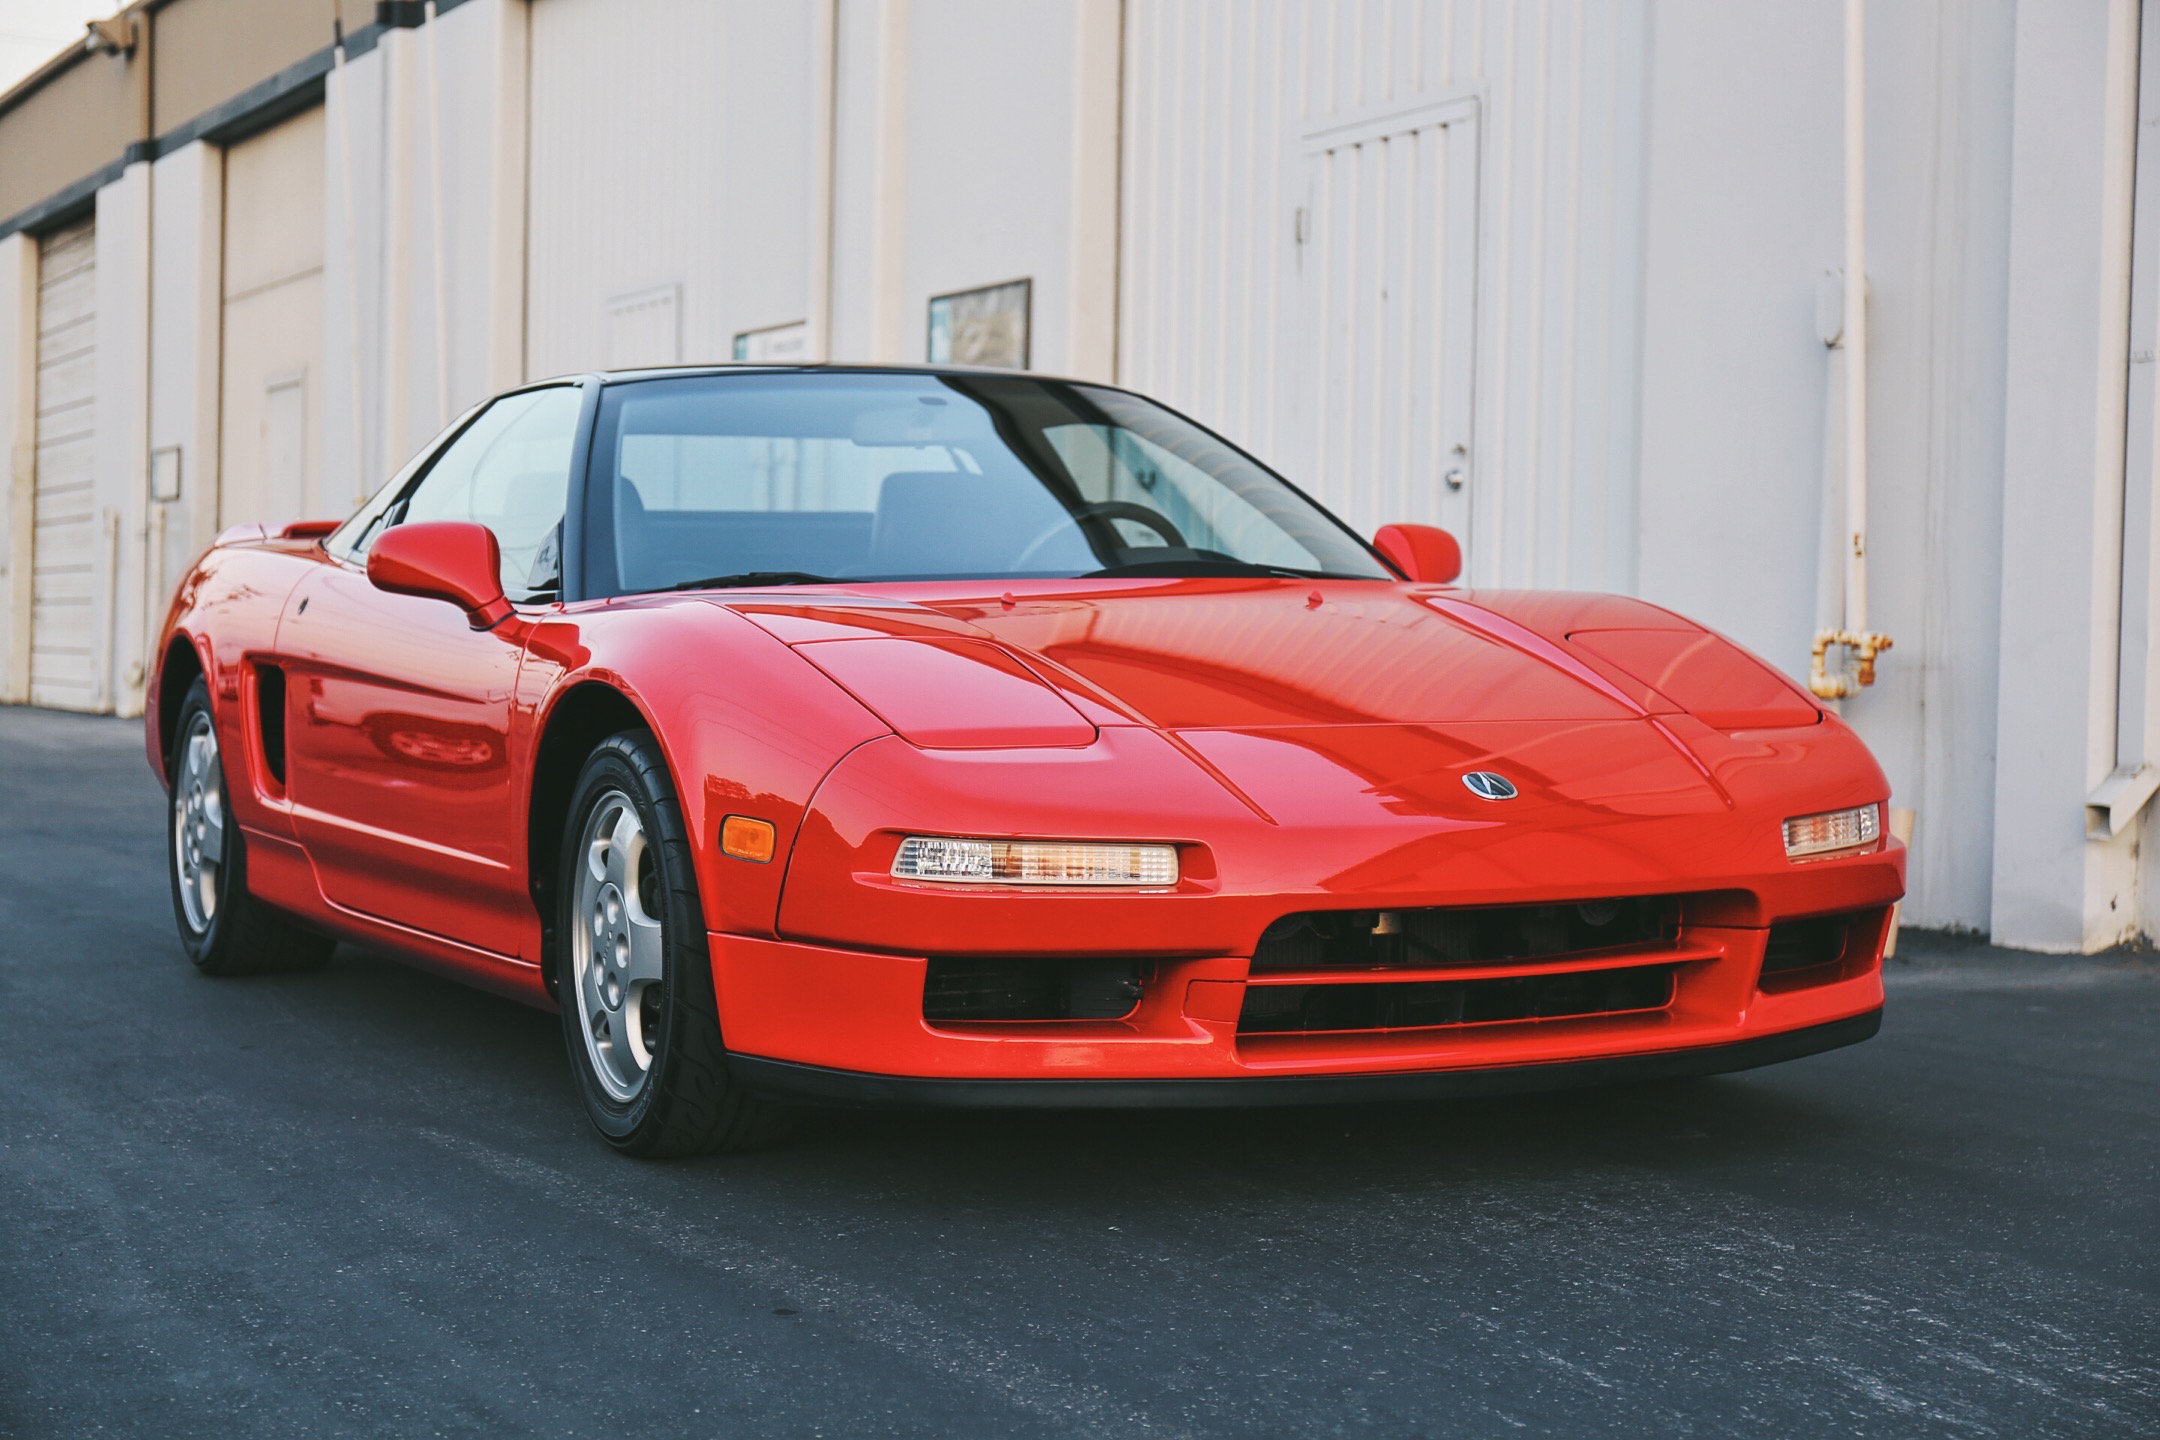 The original Acura NSX: Development history and driving the icon 